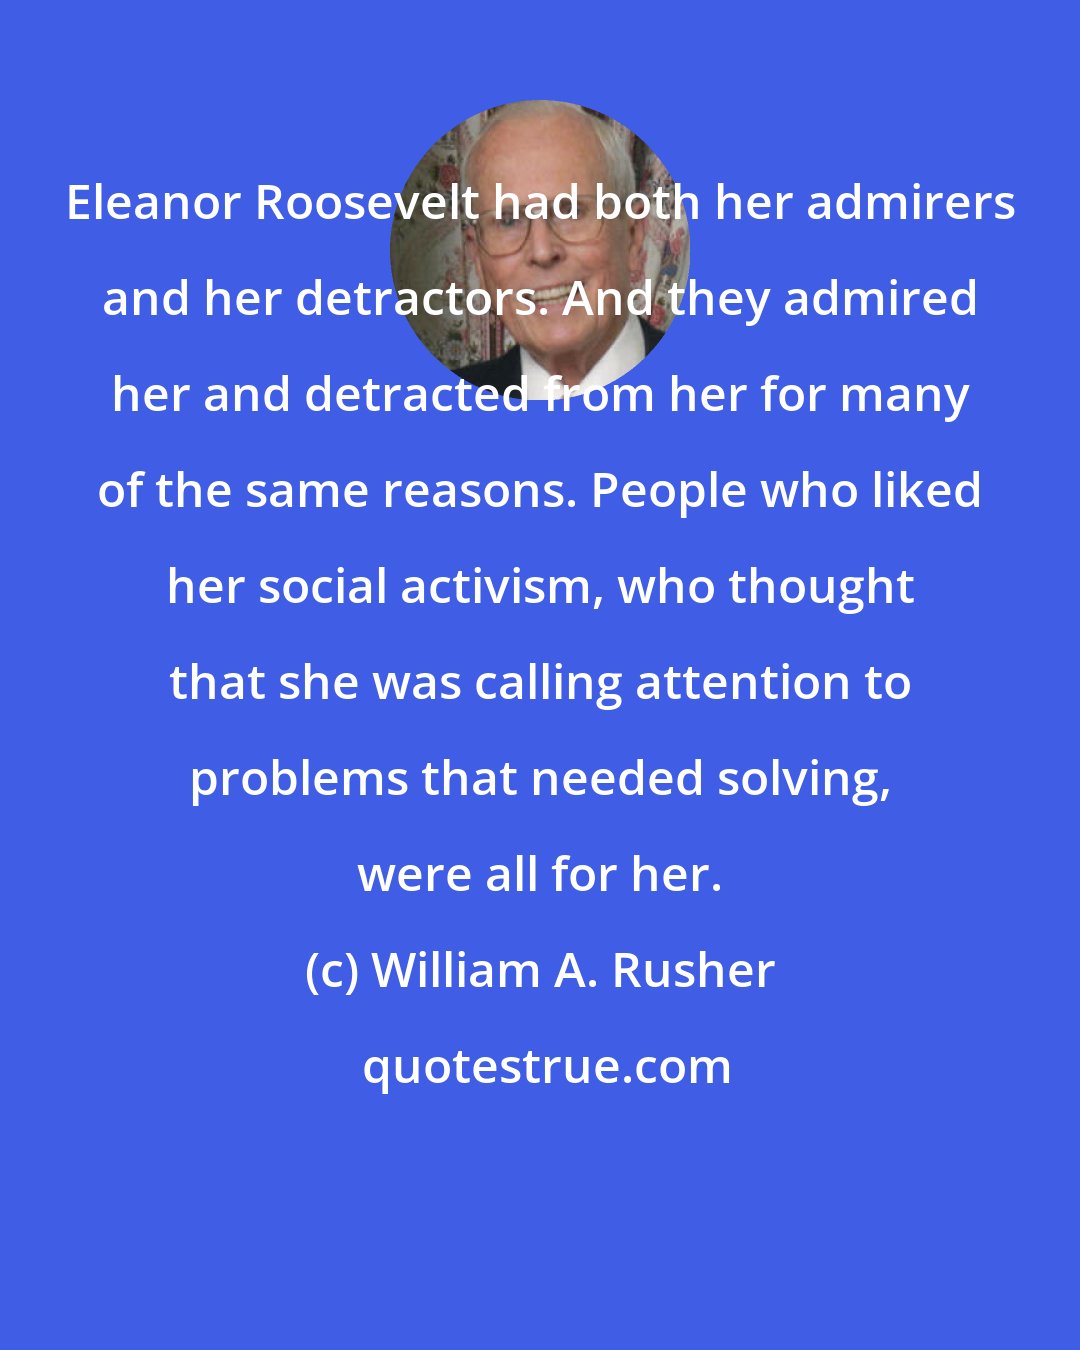 William A. Rusher: Eleanor Roosevelt had both her admirers and her detractors. And they admired her and detracted from her for many of the same reasons. People who liked her social activism, who thought that she was calling attention to problems that needed solving, were all for her.